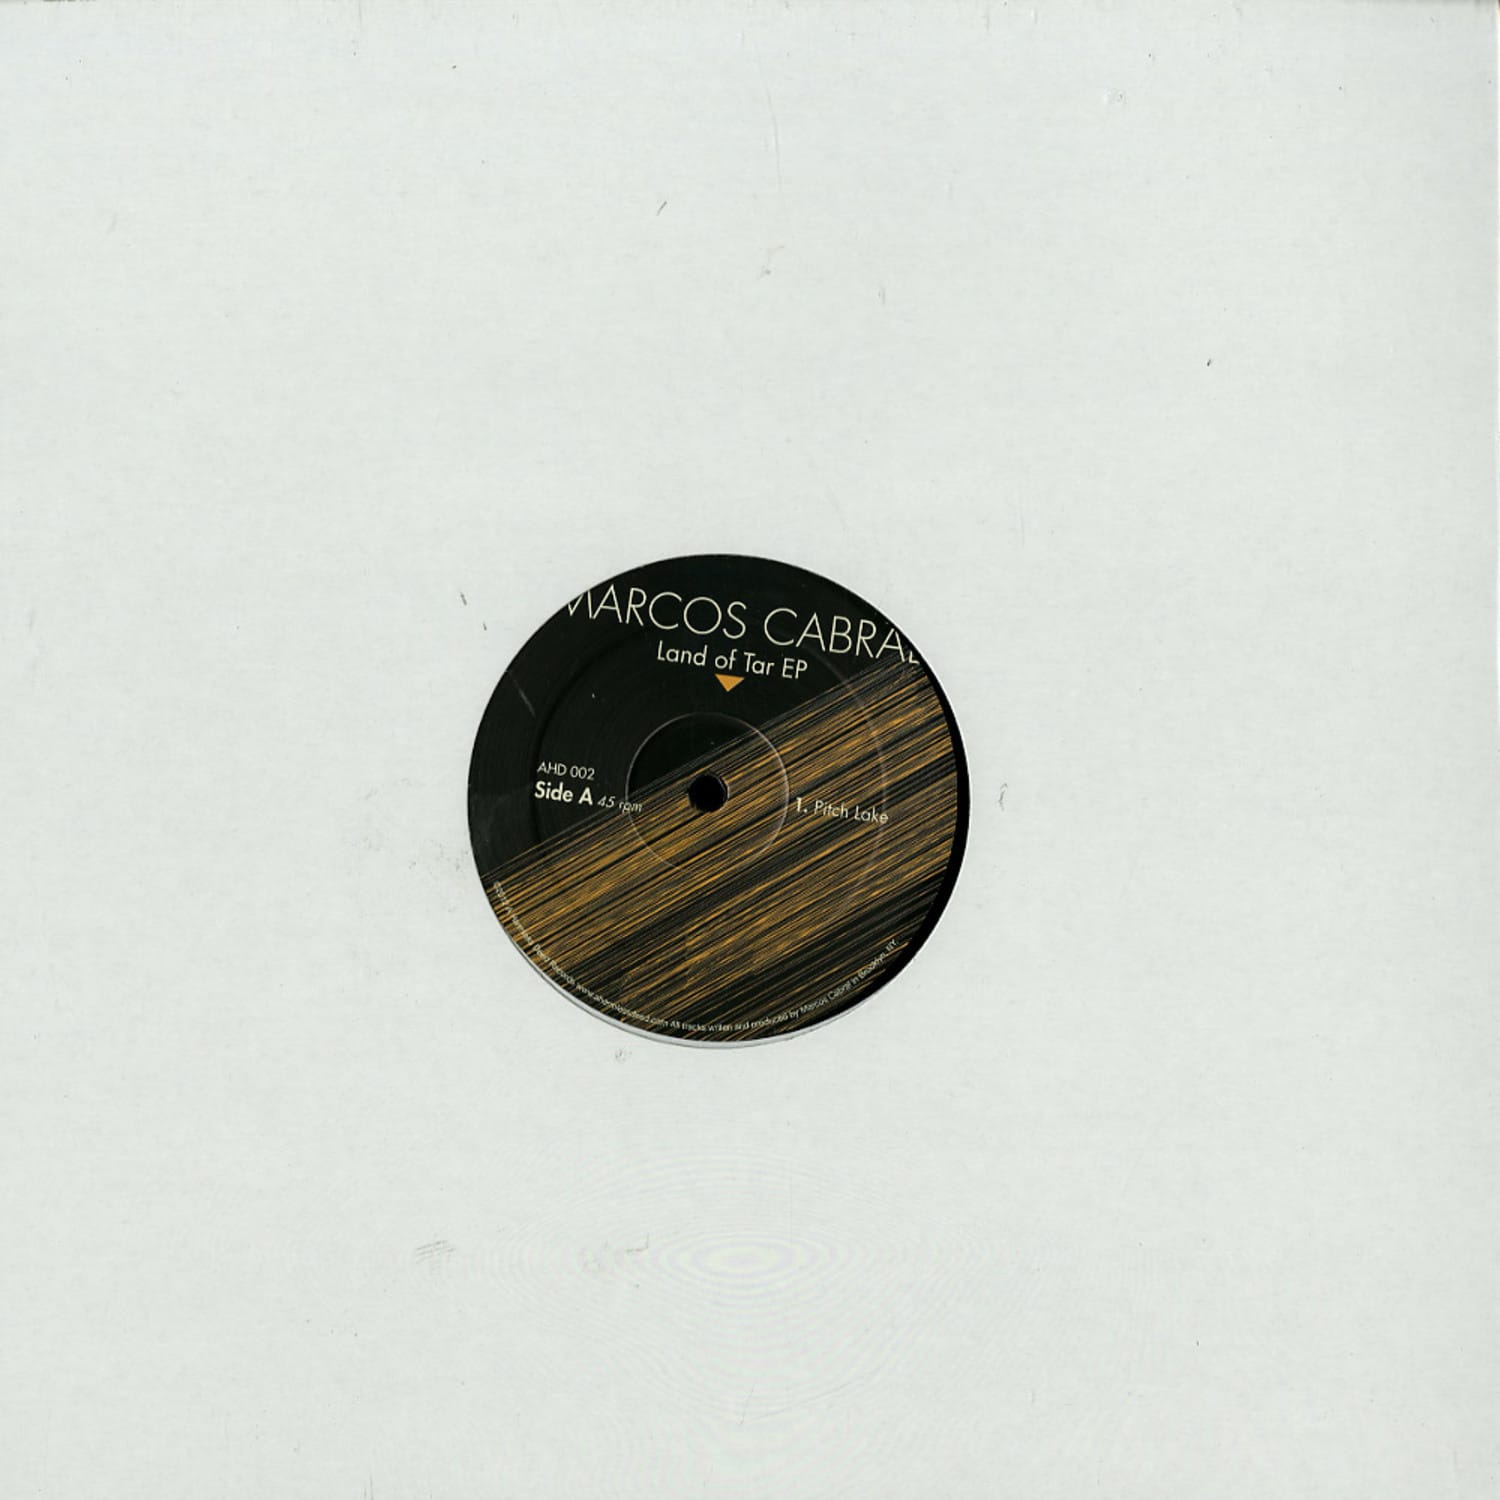 Marcos Cabral - LAND OF TAR EP